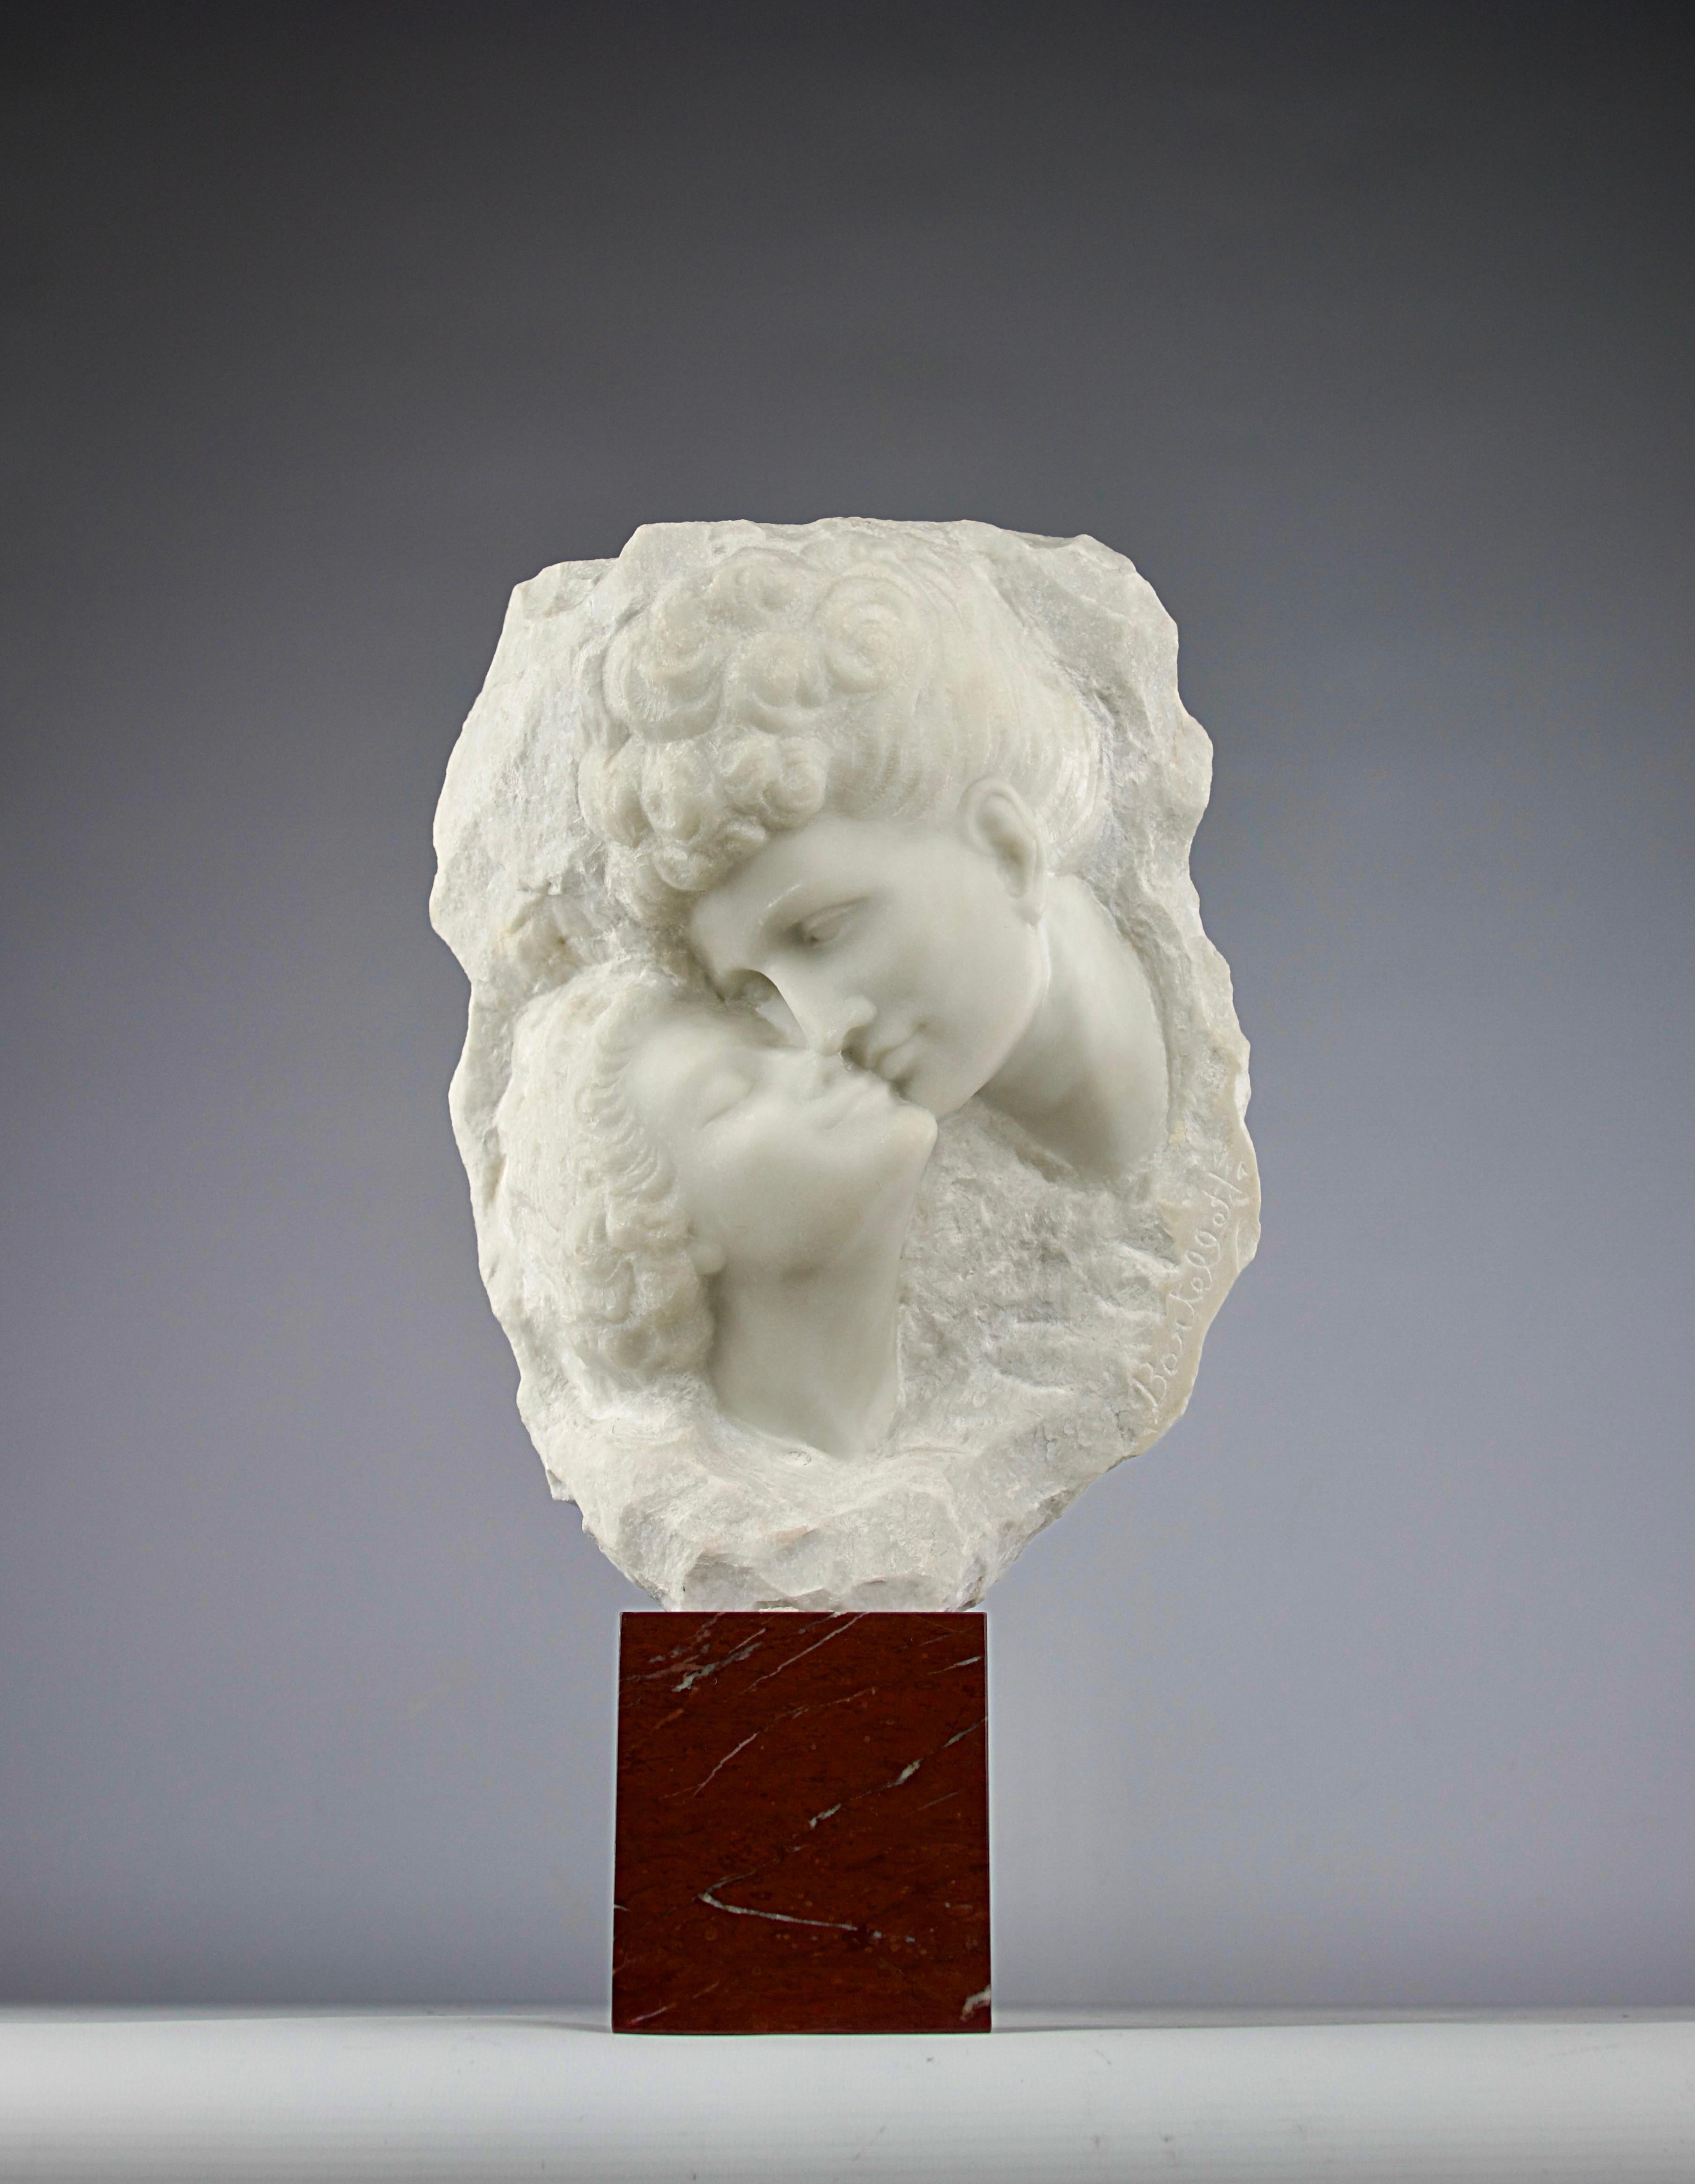 Superb sculptural representation of two lovers kissing by Aldo Bartelletti (1898-1976) in Carrara marble on a griotte coloured marble base. Italy, early 20th century.

Very good condition. 

Dimensions in cm ( H x L x l ) : 28 x 23 x 13 
Total